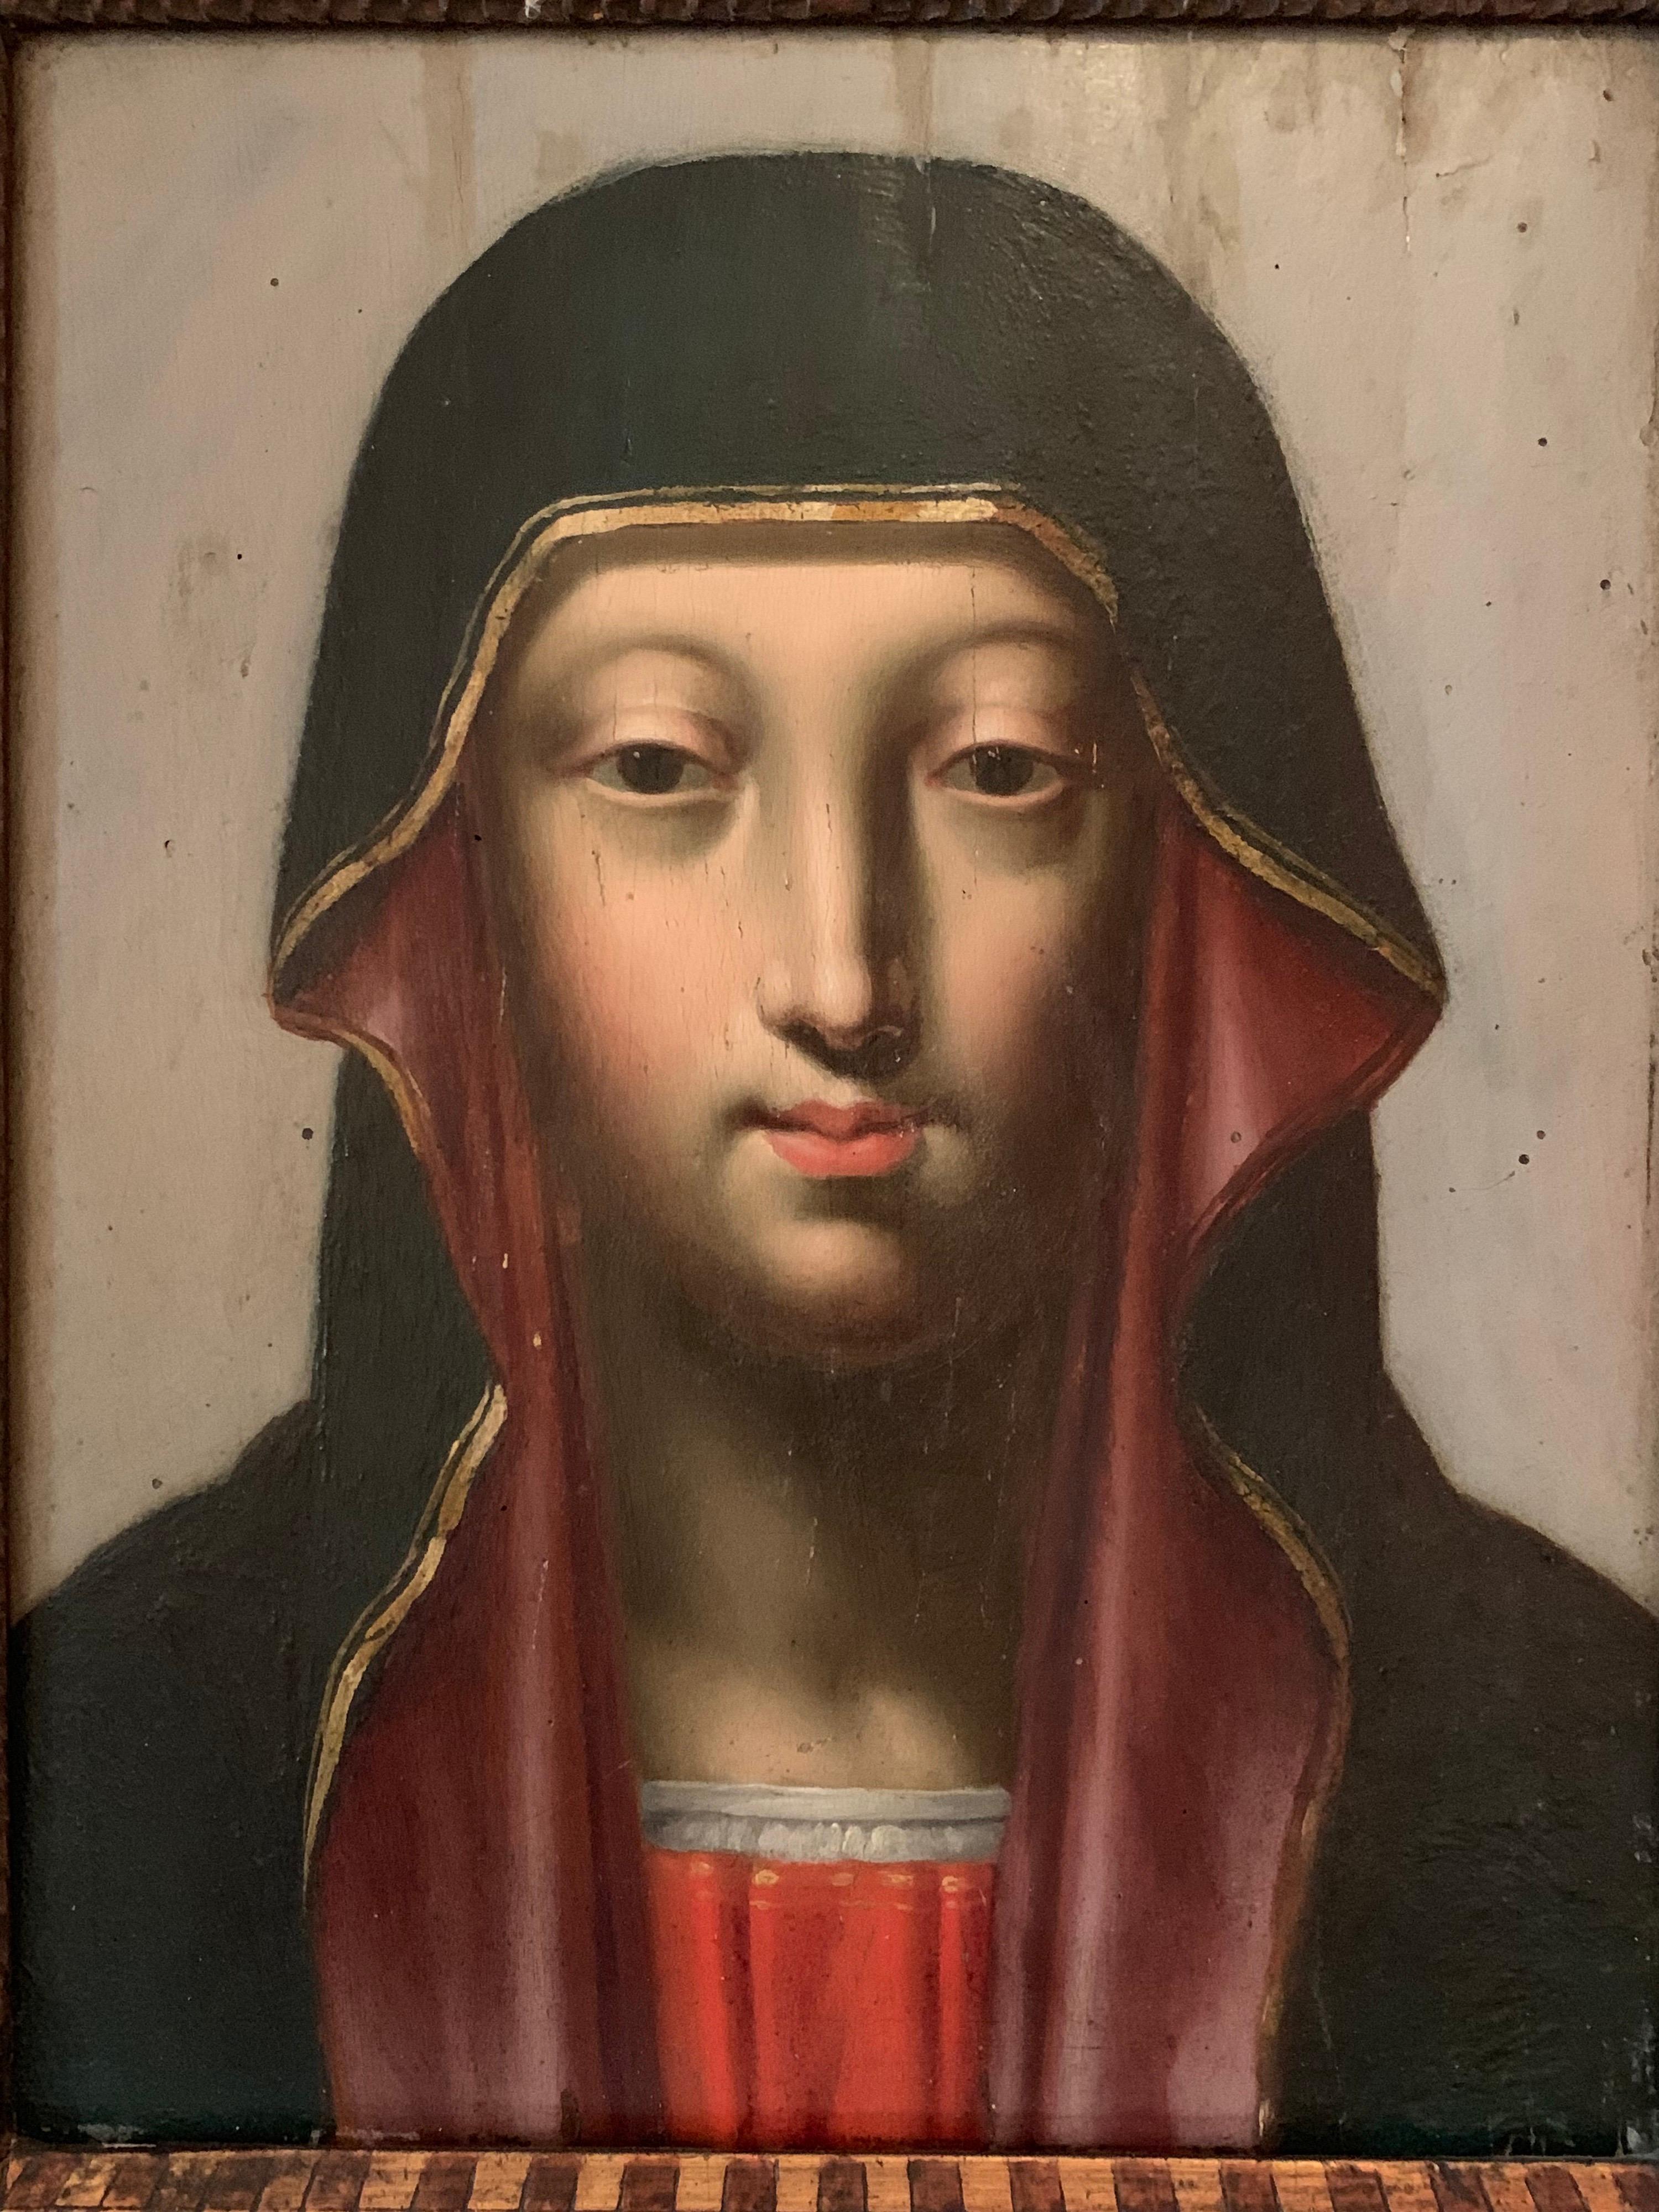 FINE 1600's FLEMISH OLD MASTER OIL ON CRADLED PANEL - HEAD PORTRAIT THE VIRGIN - Painting by Unknown